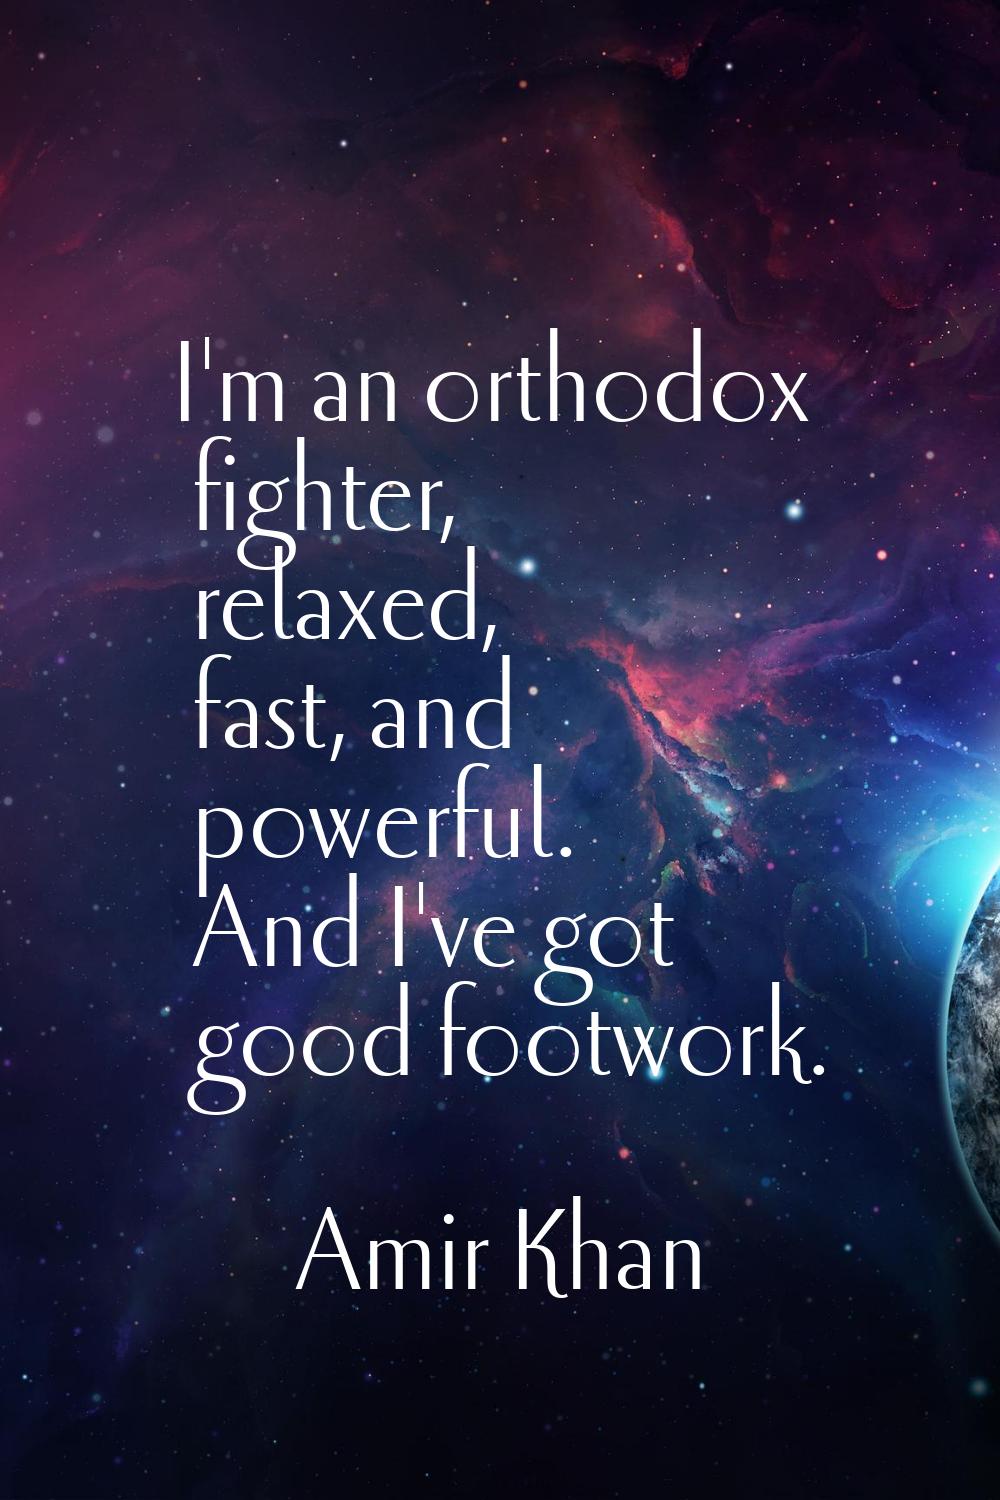 I'm an orthodox fighter, relaxed, fast, and powerful. And I've got good footwork.